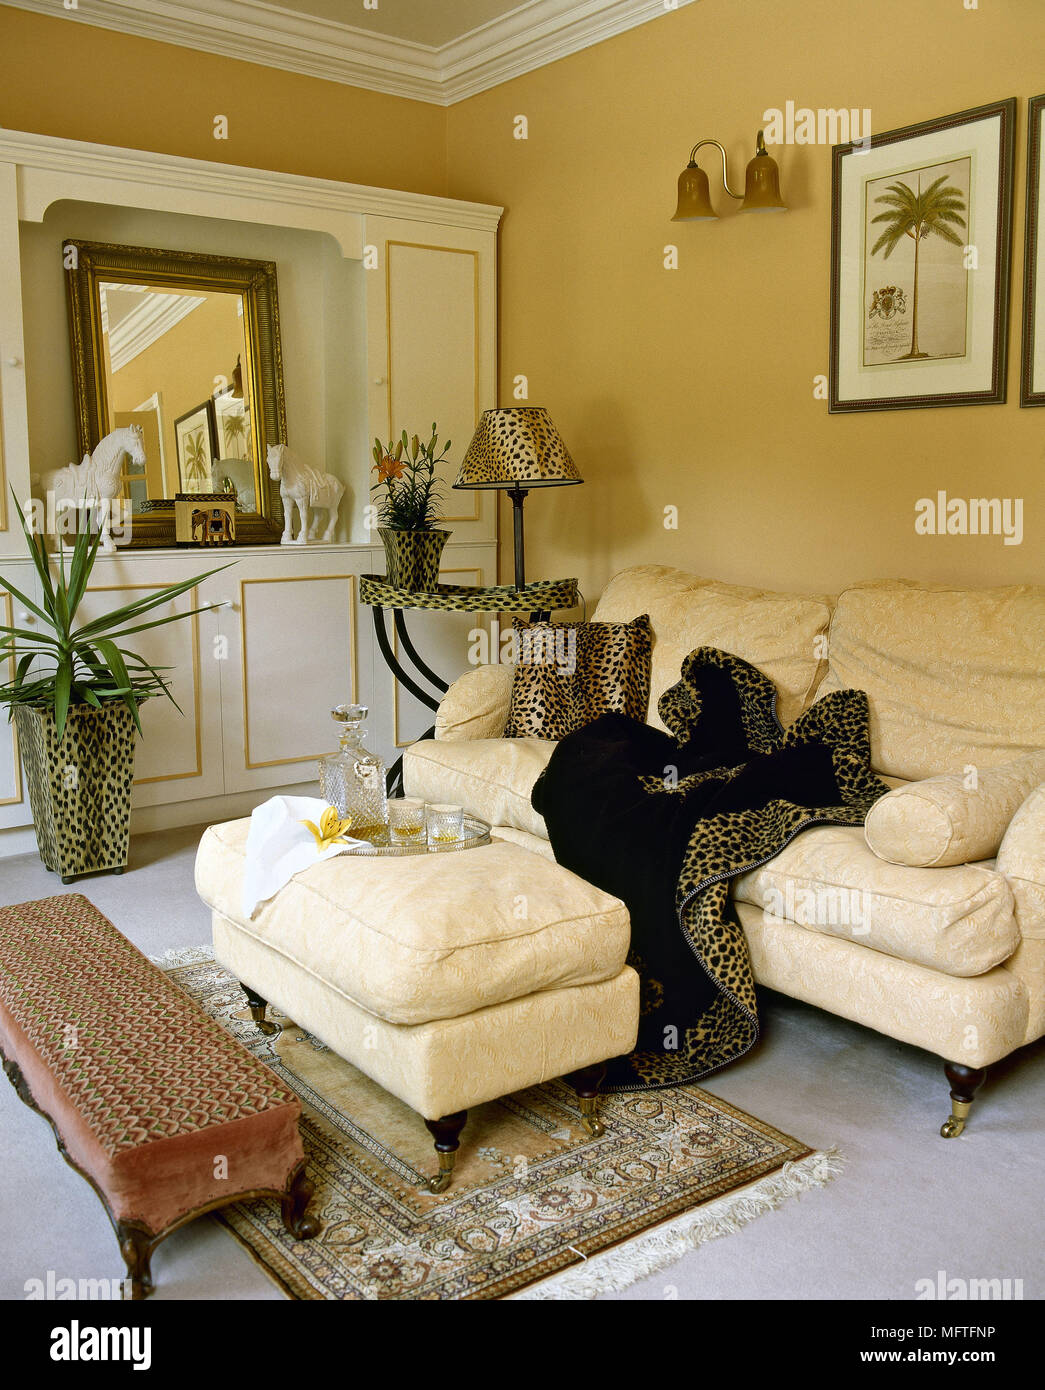 Sitting room with yellow walls and cream sofa with leopard print ...